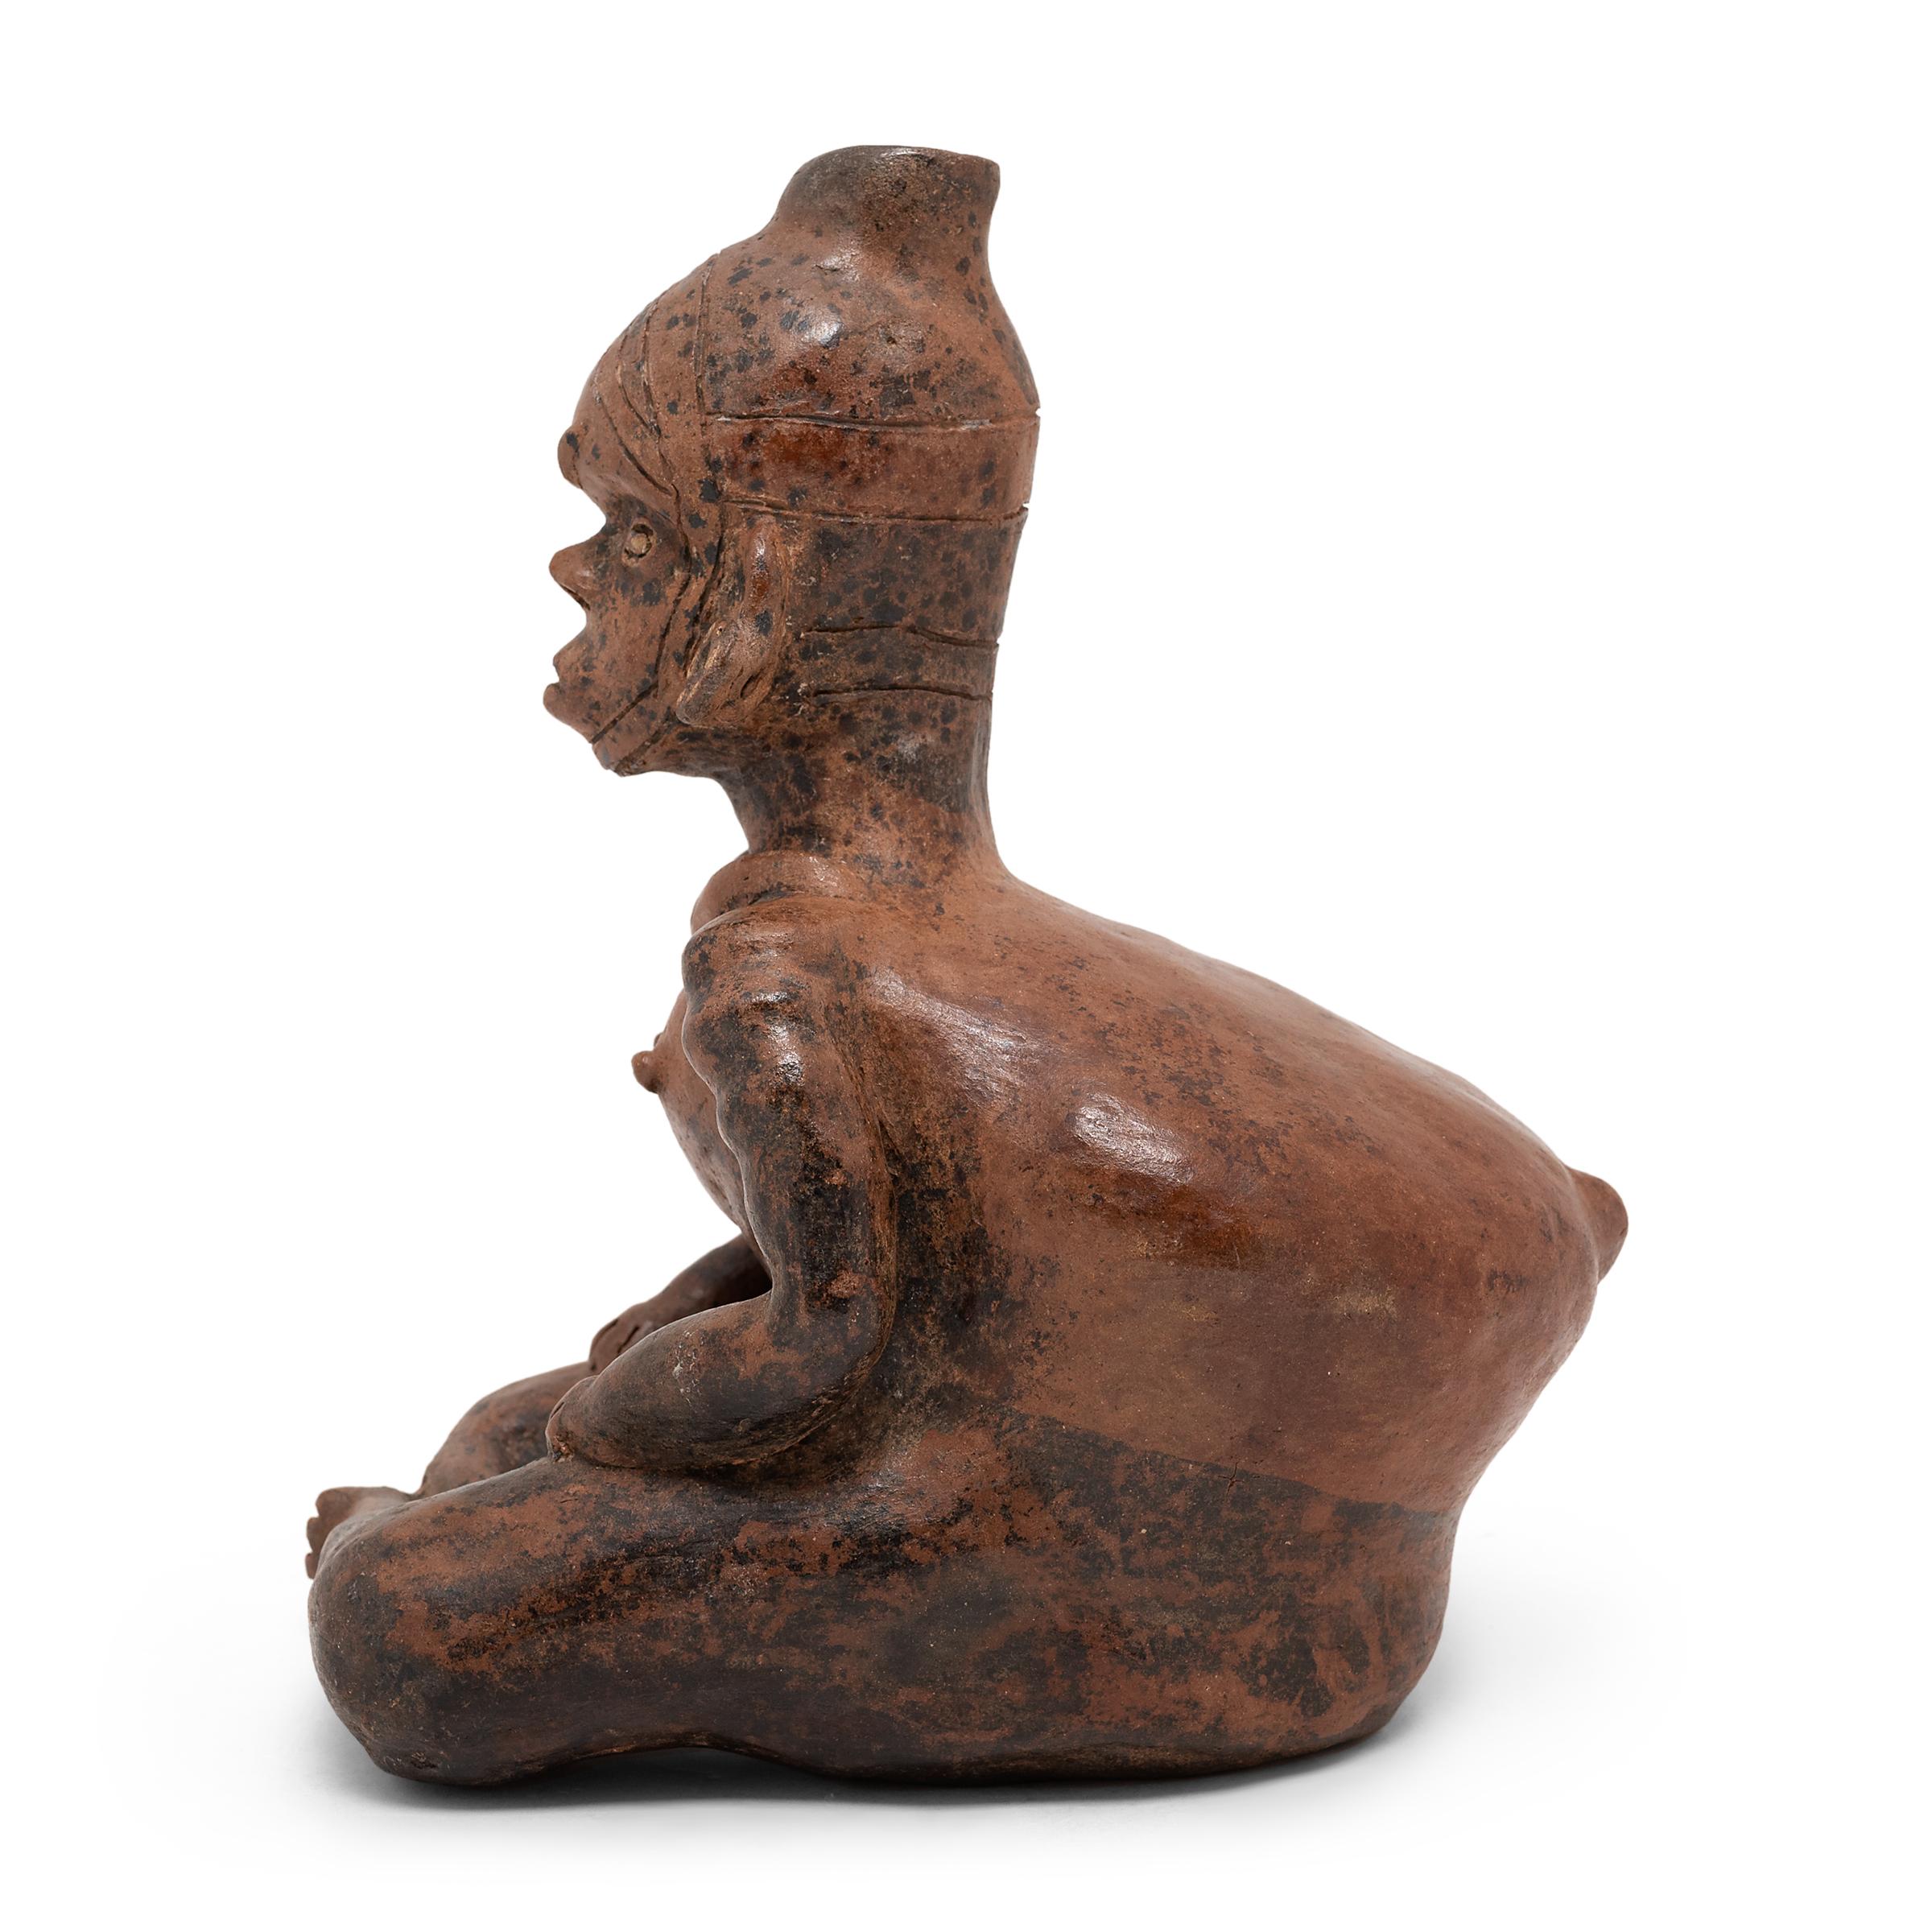 Beautifully aged with a rich patina and pitted wear, this seated ceramic male figure is attributed to the Colima region of Western Mexico. The stylized form of this male figure follows the conventions of Colima pottery, emphasizing squat bodily